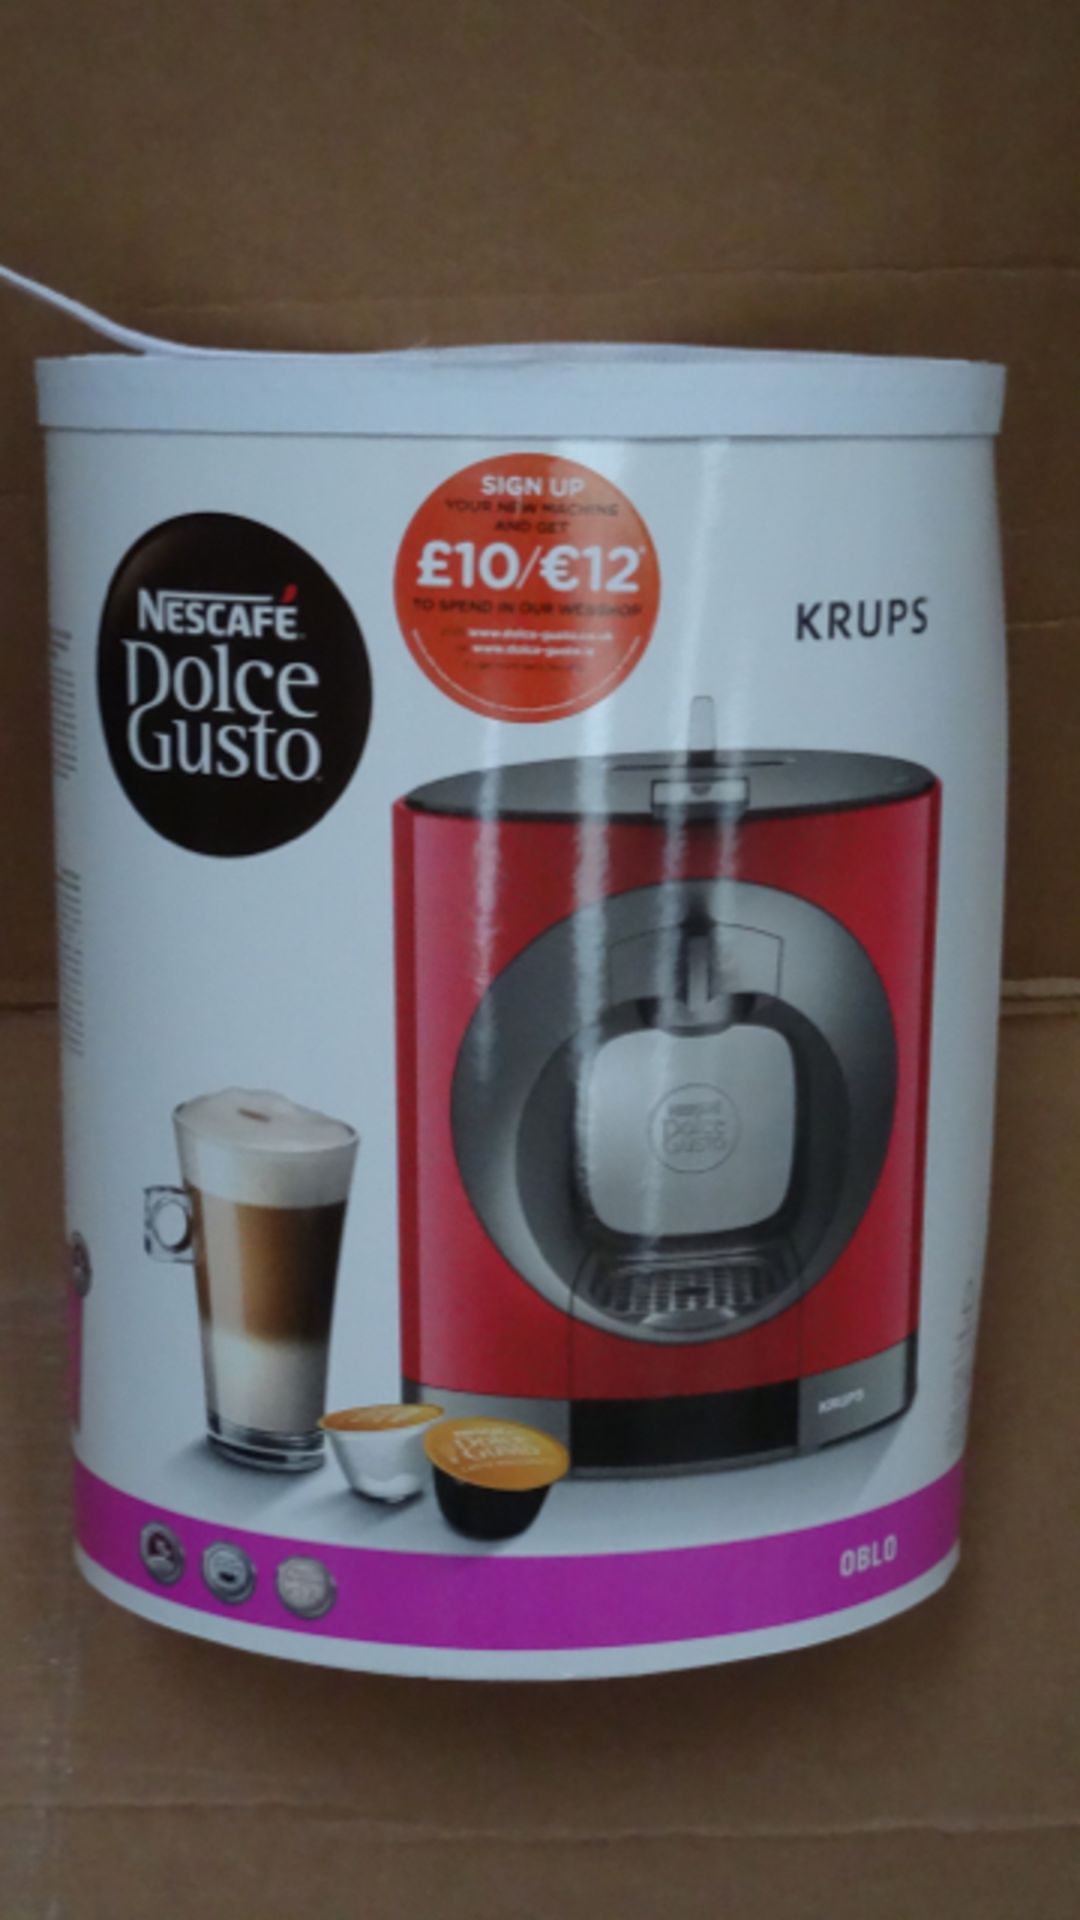 1 x Brand New Nescafe Dolce Gusto Krups Oblo Coffee Machine. With hot and cold selection. Make